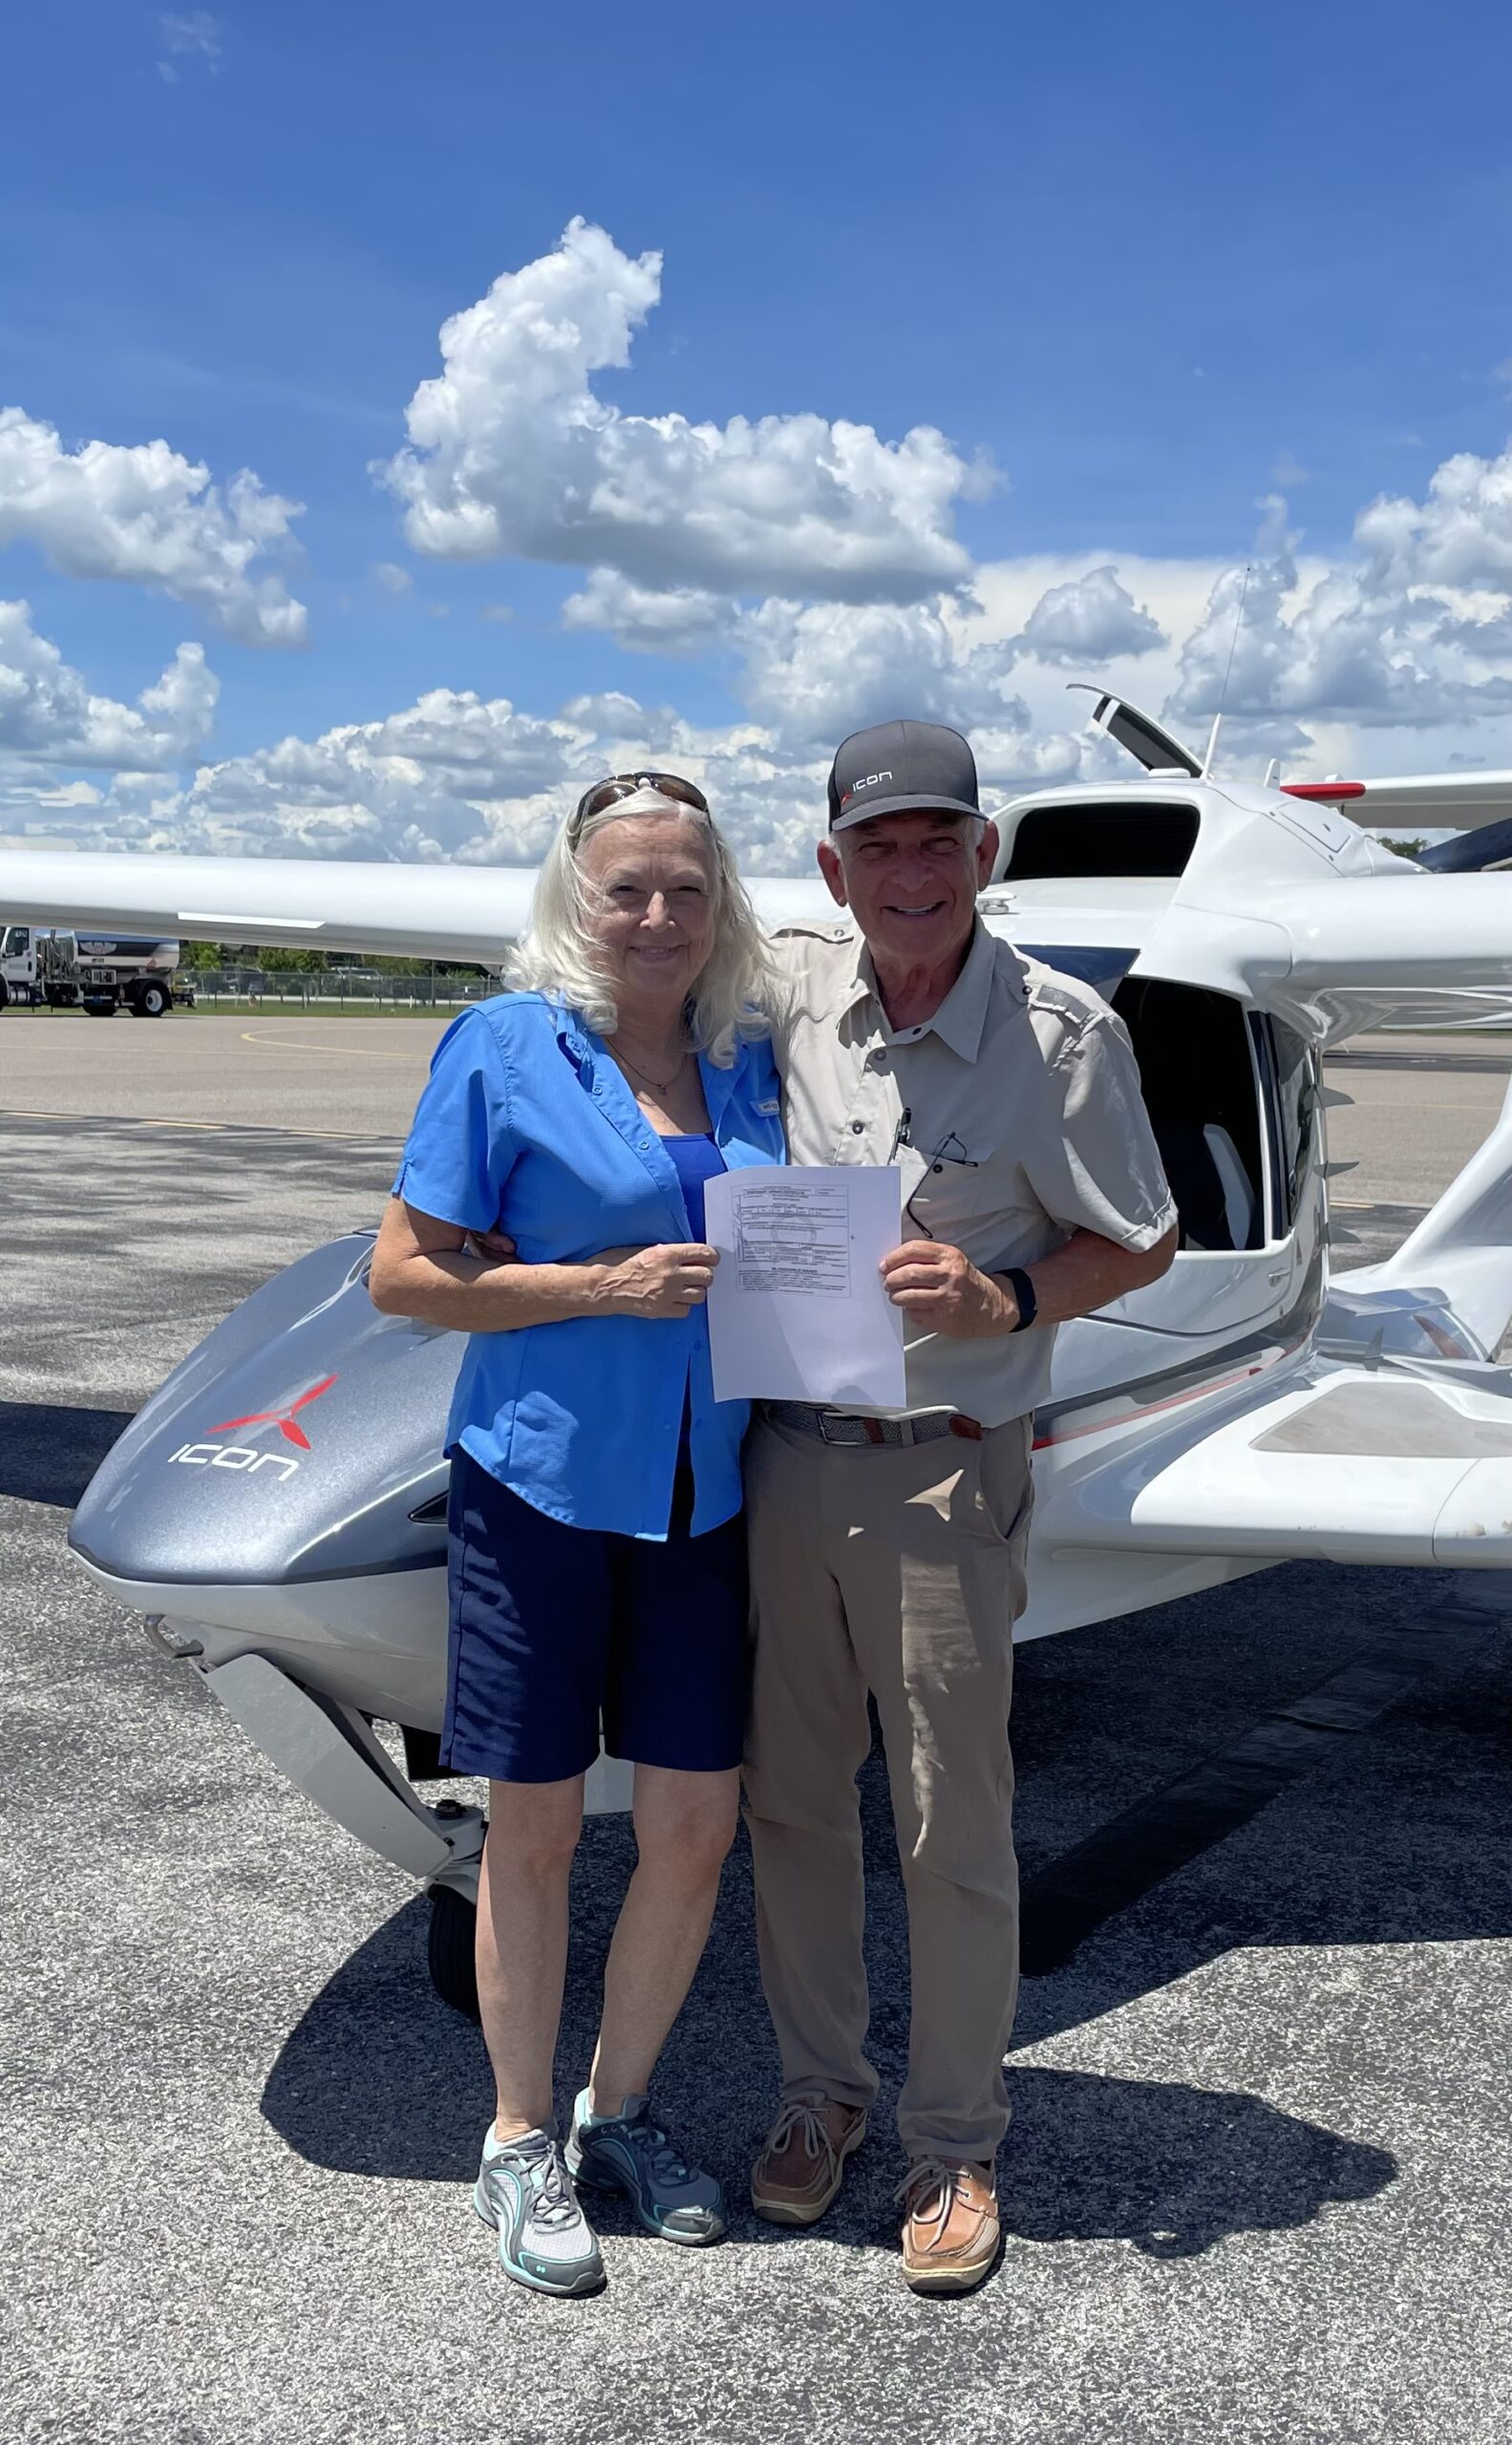 Sport pilot certificate complete at 80 years young! 